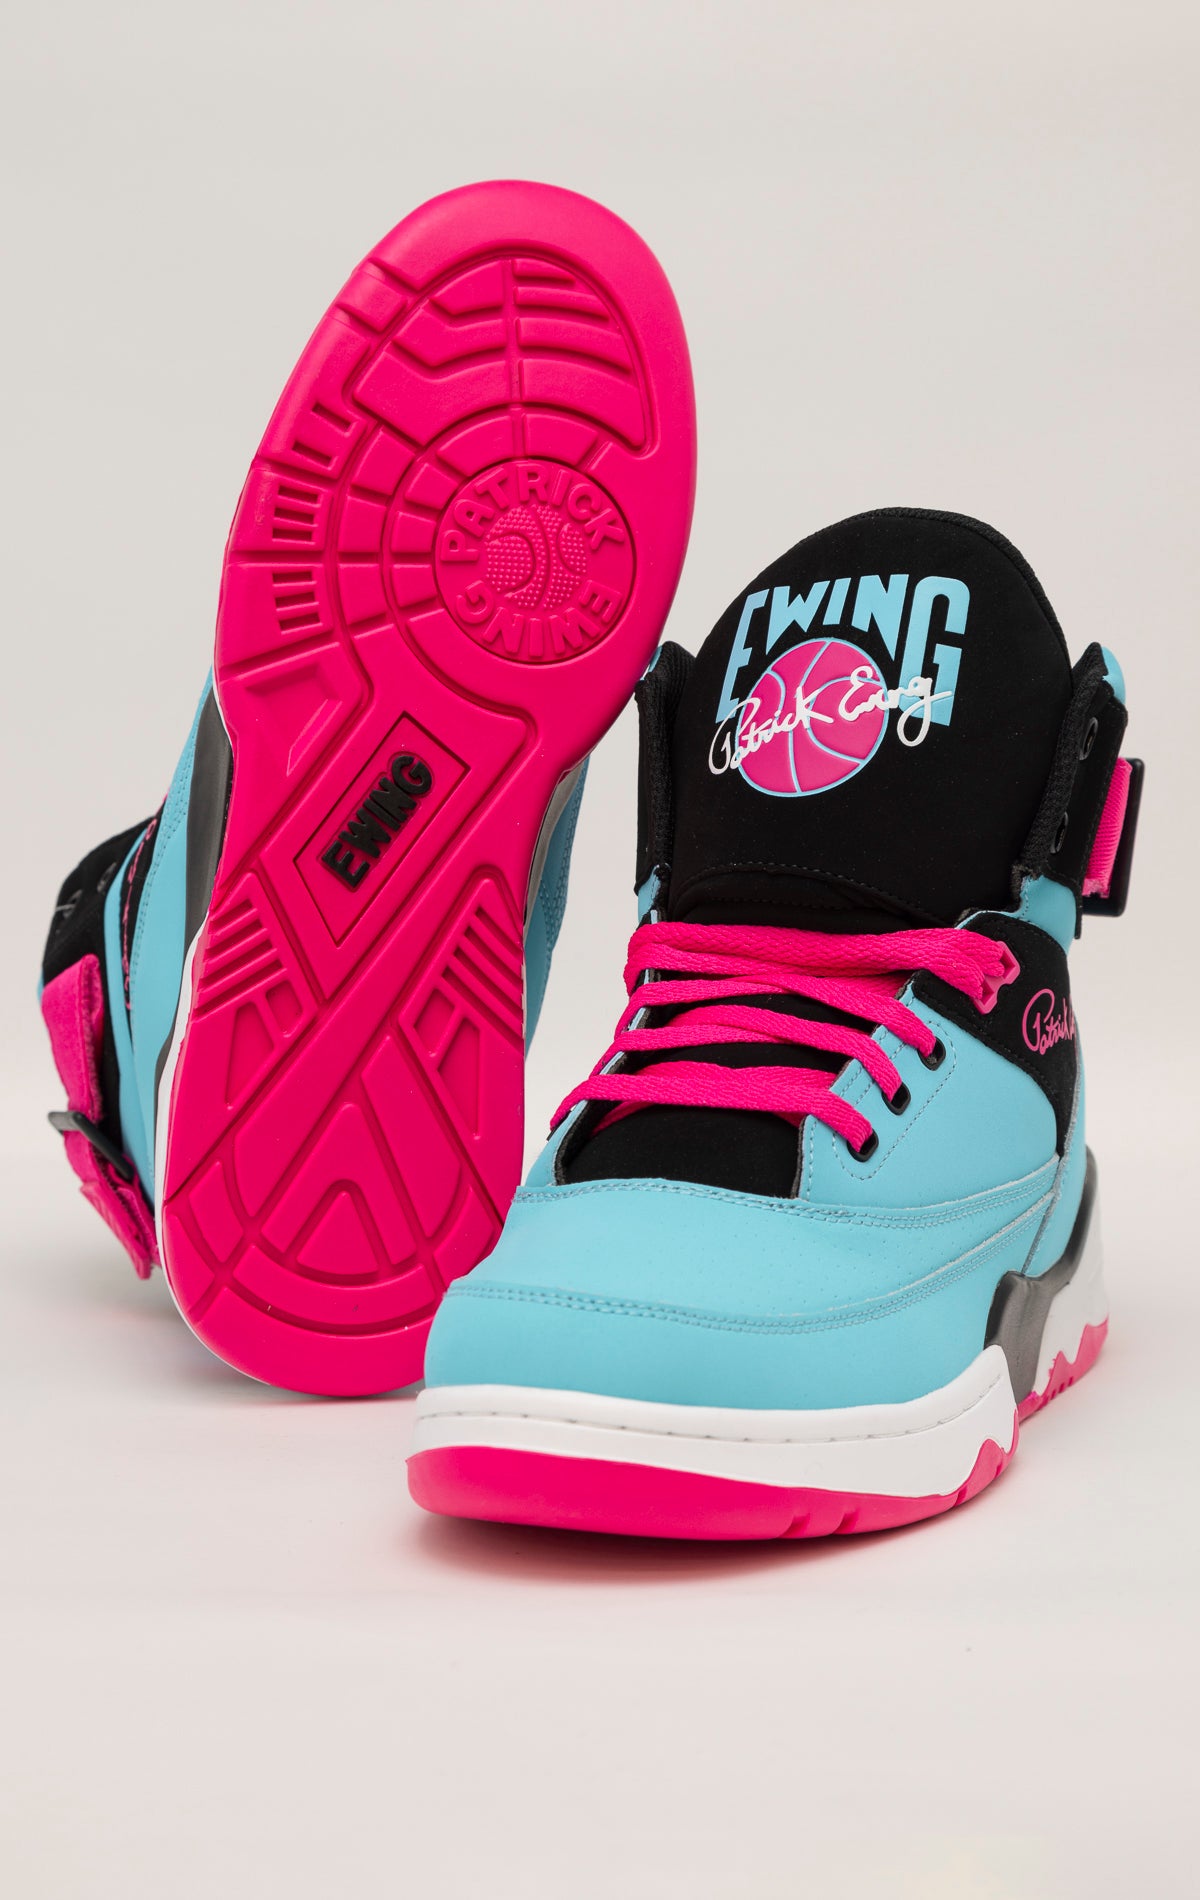 Blue, black, and pink high-top basketball sneakers by Patrick Ewing Athletics. Leather upper, padded collar, and Ewing Athletics logo on the tongue